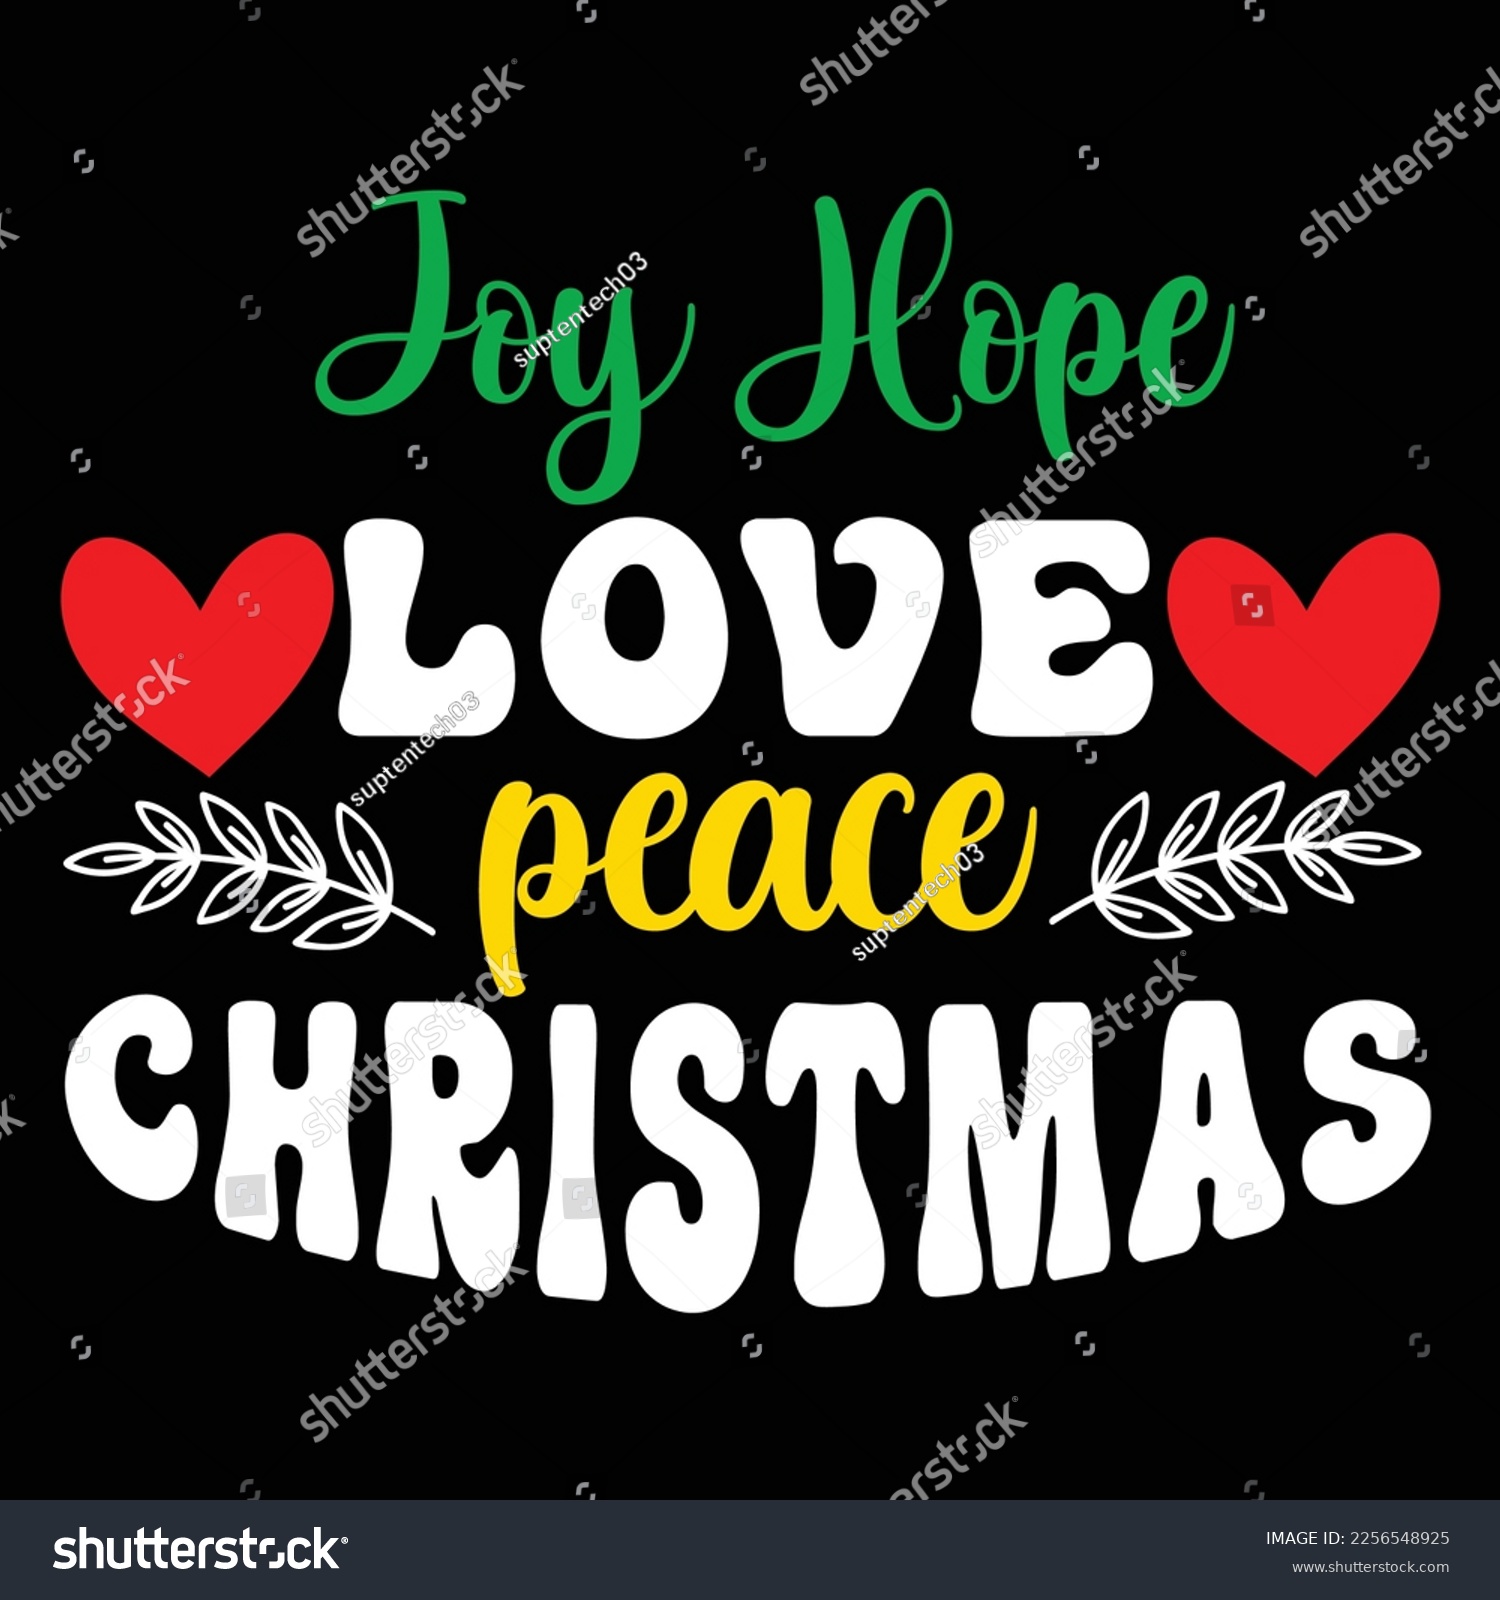 SVG of Joy Hope Love Peace Christmas, Merry Christmas shirts Print Template, Xmas Ugly Snow Santa Clouse New Year Holiday Candy Santa Hat vector illustration for Christmas hand lettered svg